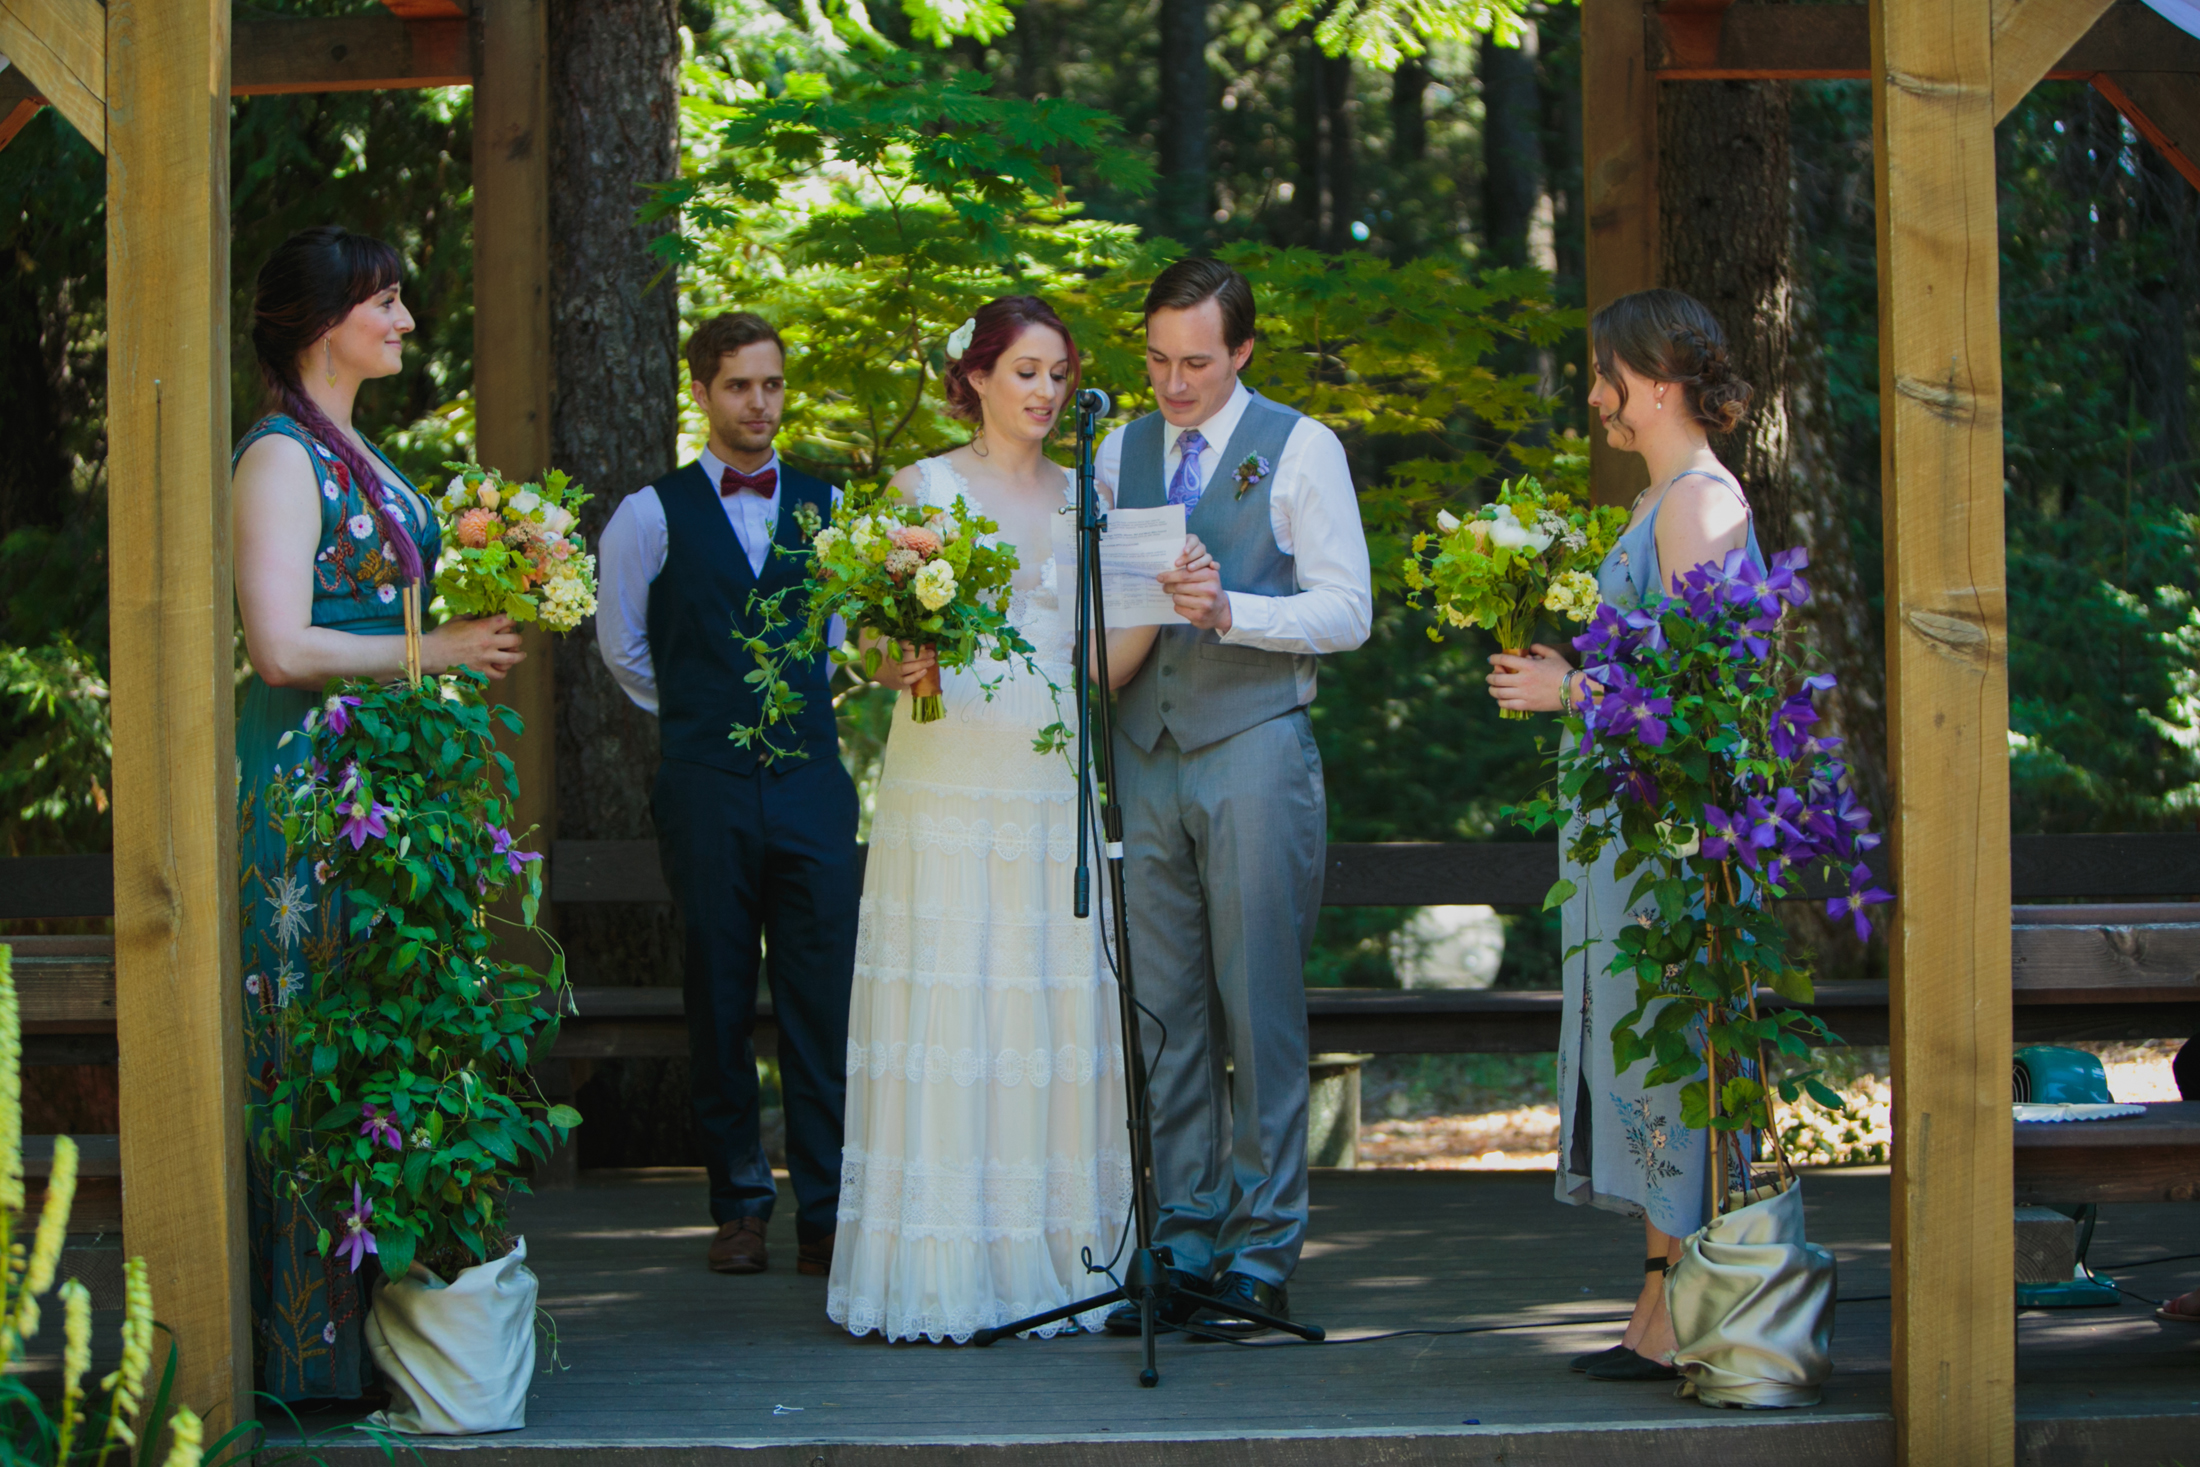 The bride and groom read their vows together off of a shared piece of paper.